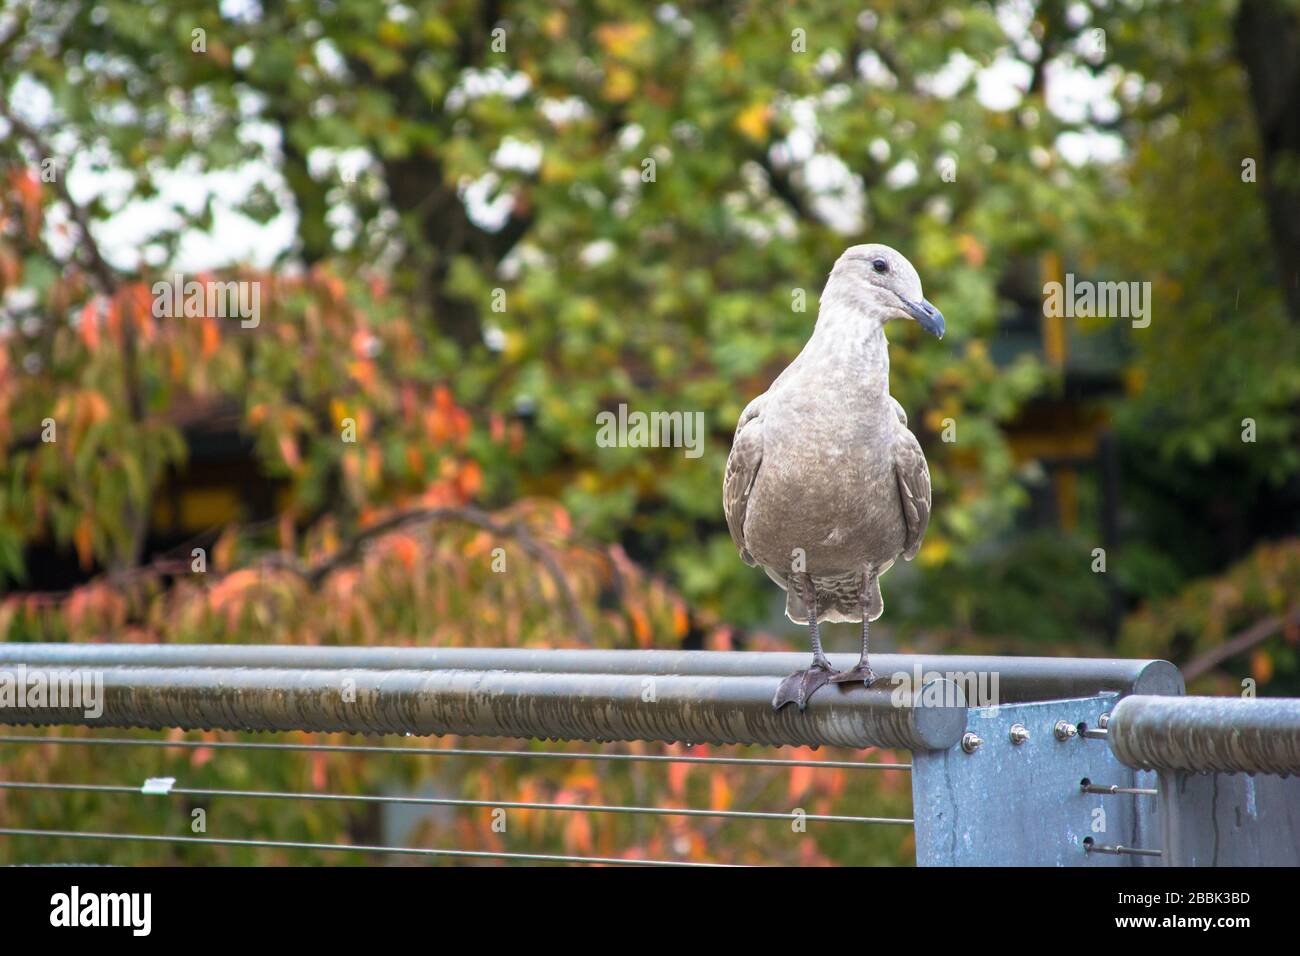 A curious seagull on a pole with autumn leaves in the background Stock Photo